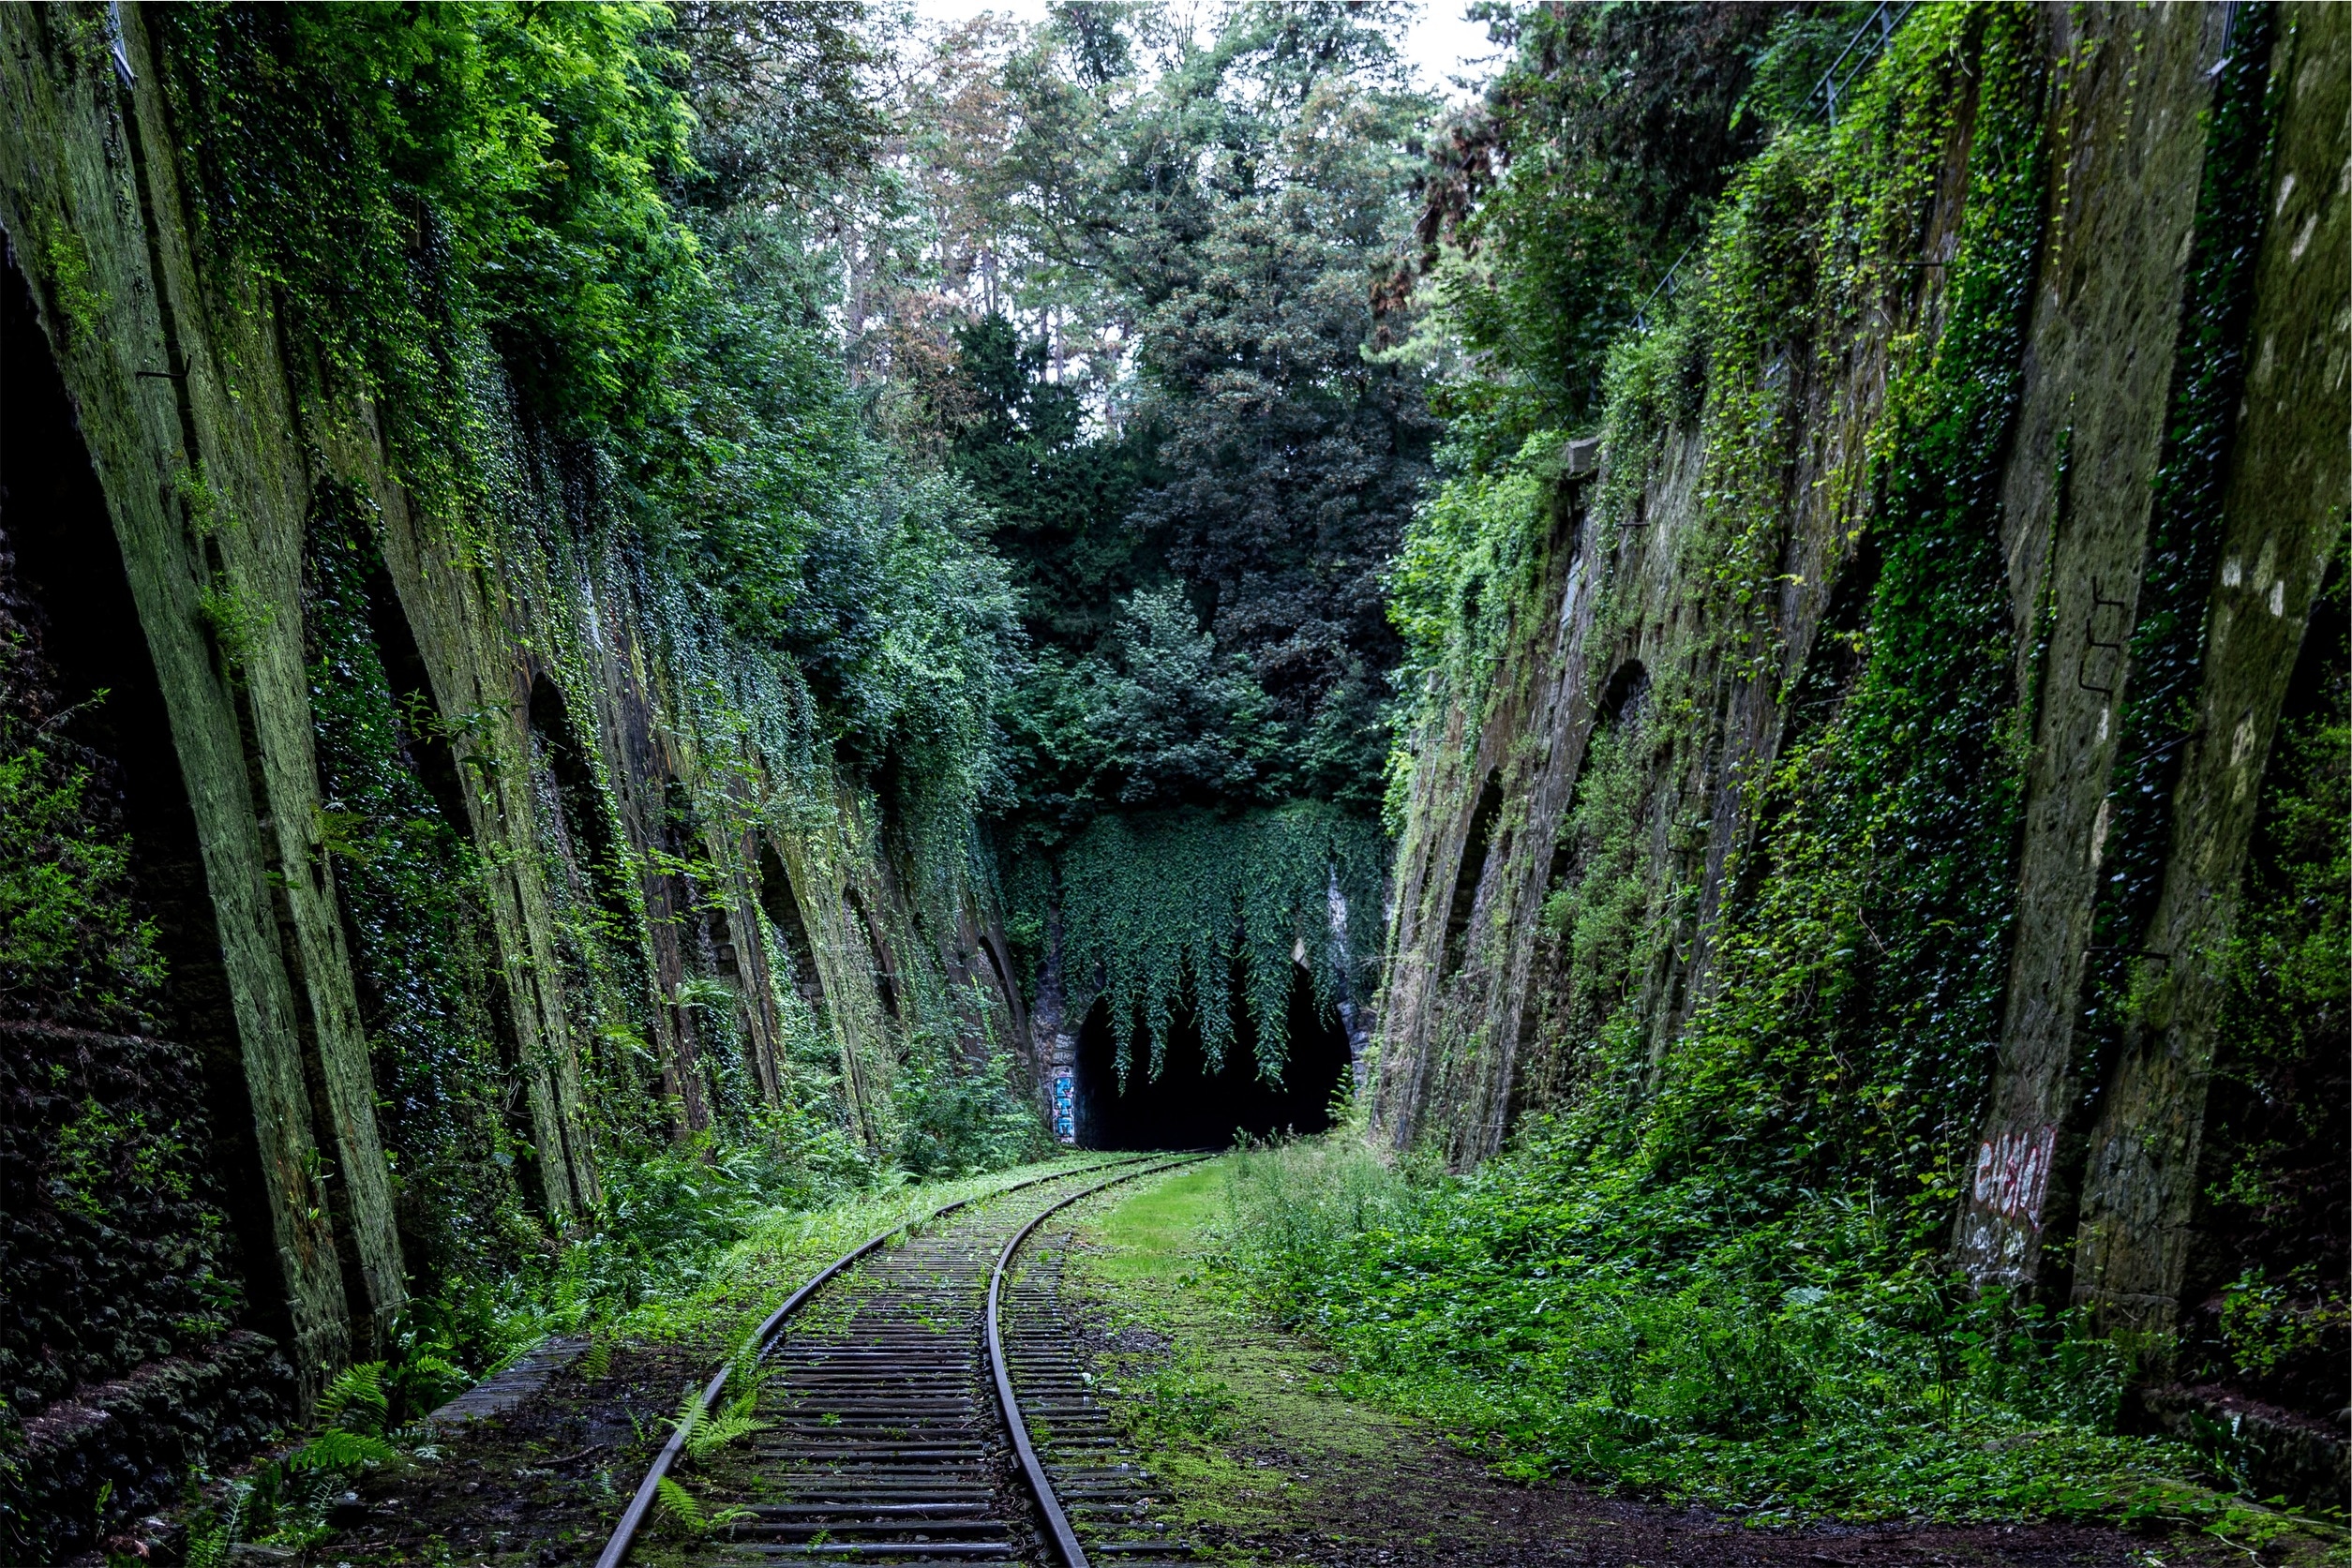 green leaf plant and gray metal railway